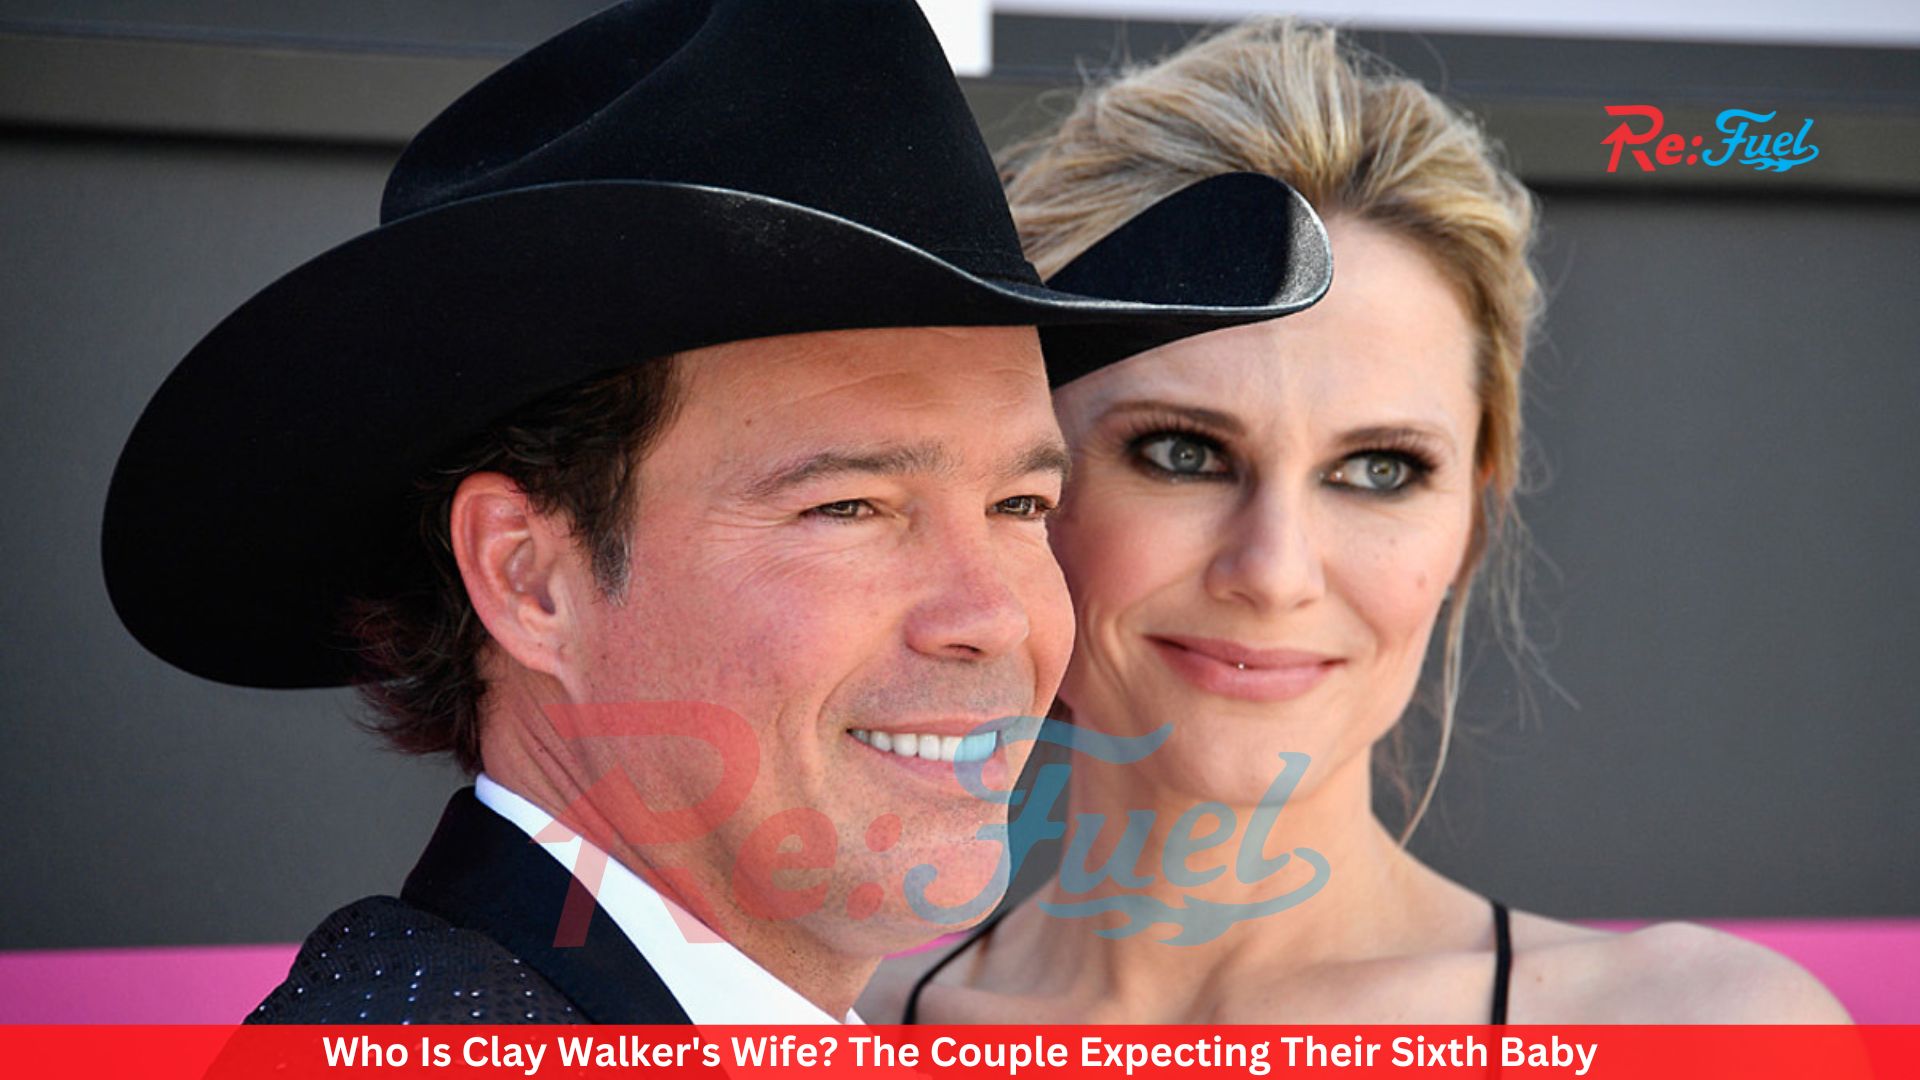 Who Is Clay Walker's Wife? The Couple Expecting Their Sixth Baby